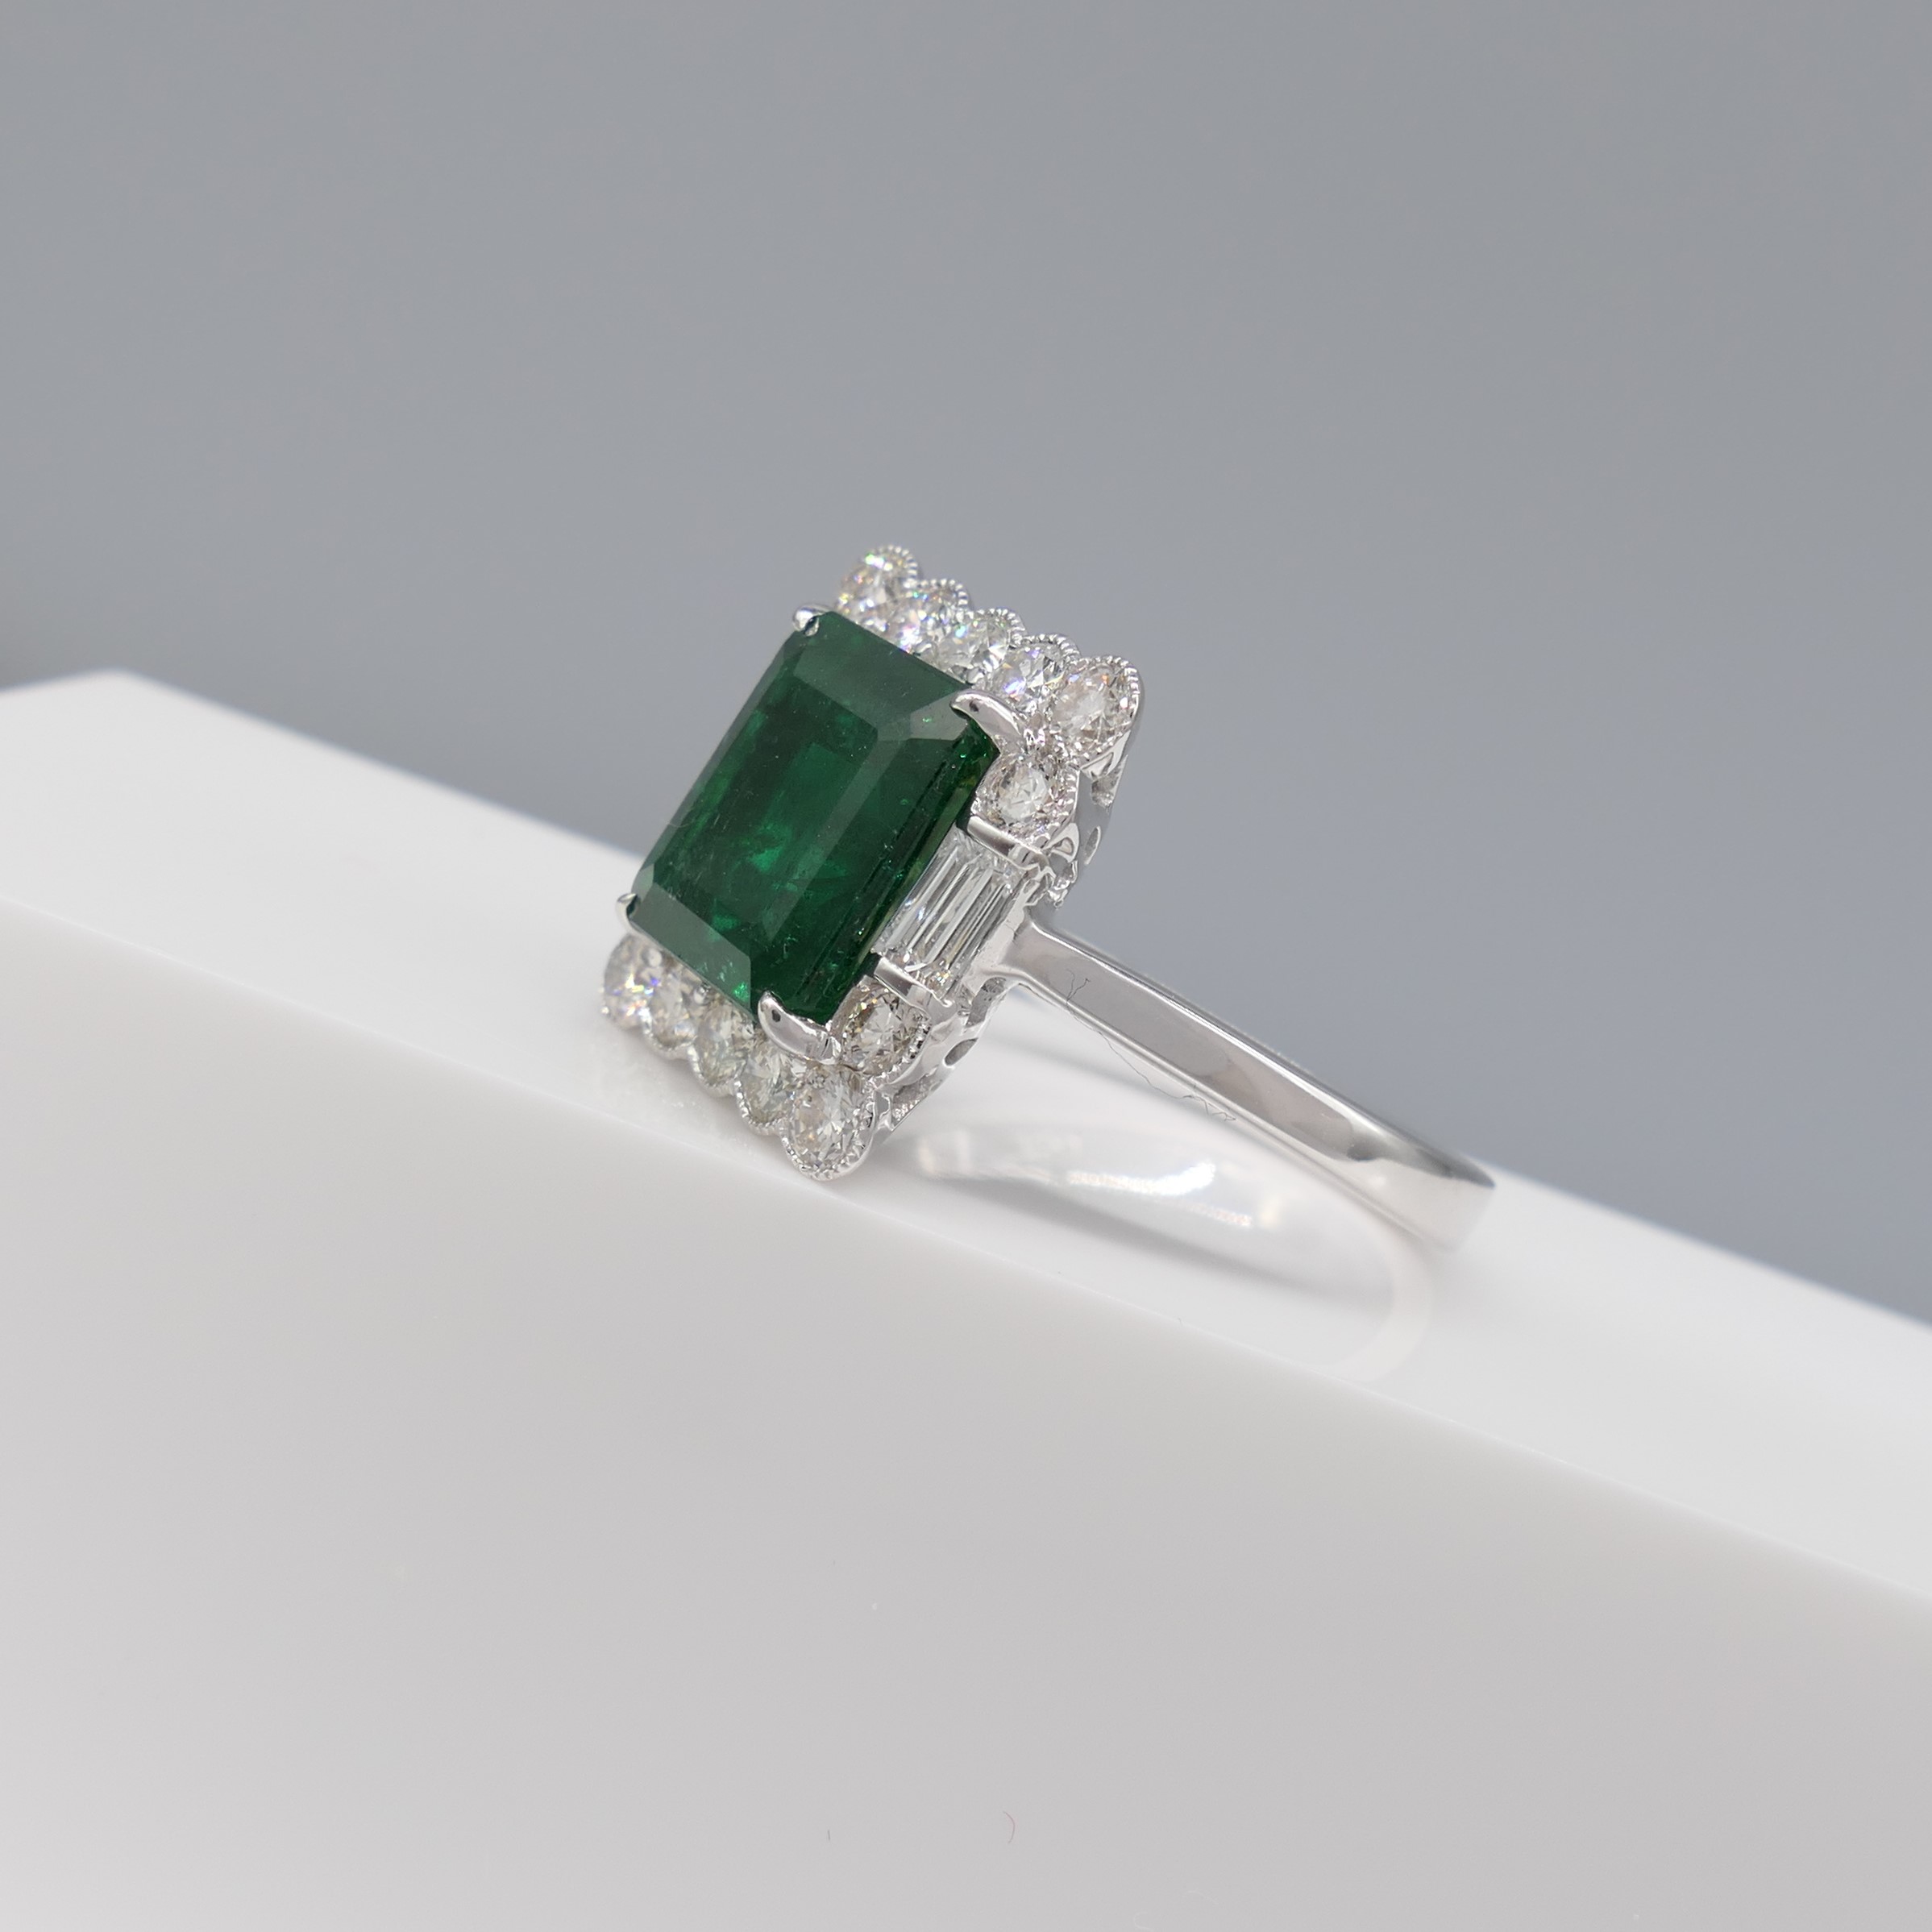 18ct White Gold Cocktail Ring Set With A Large Emerald and Diamonds - Image 7 of 7